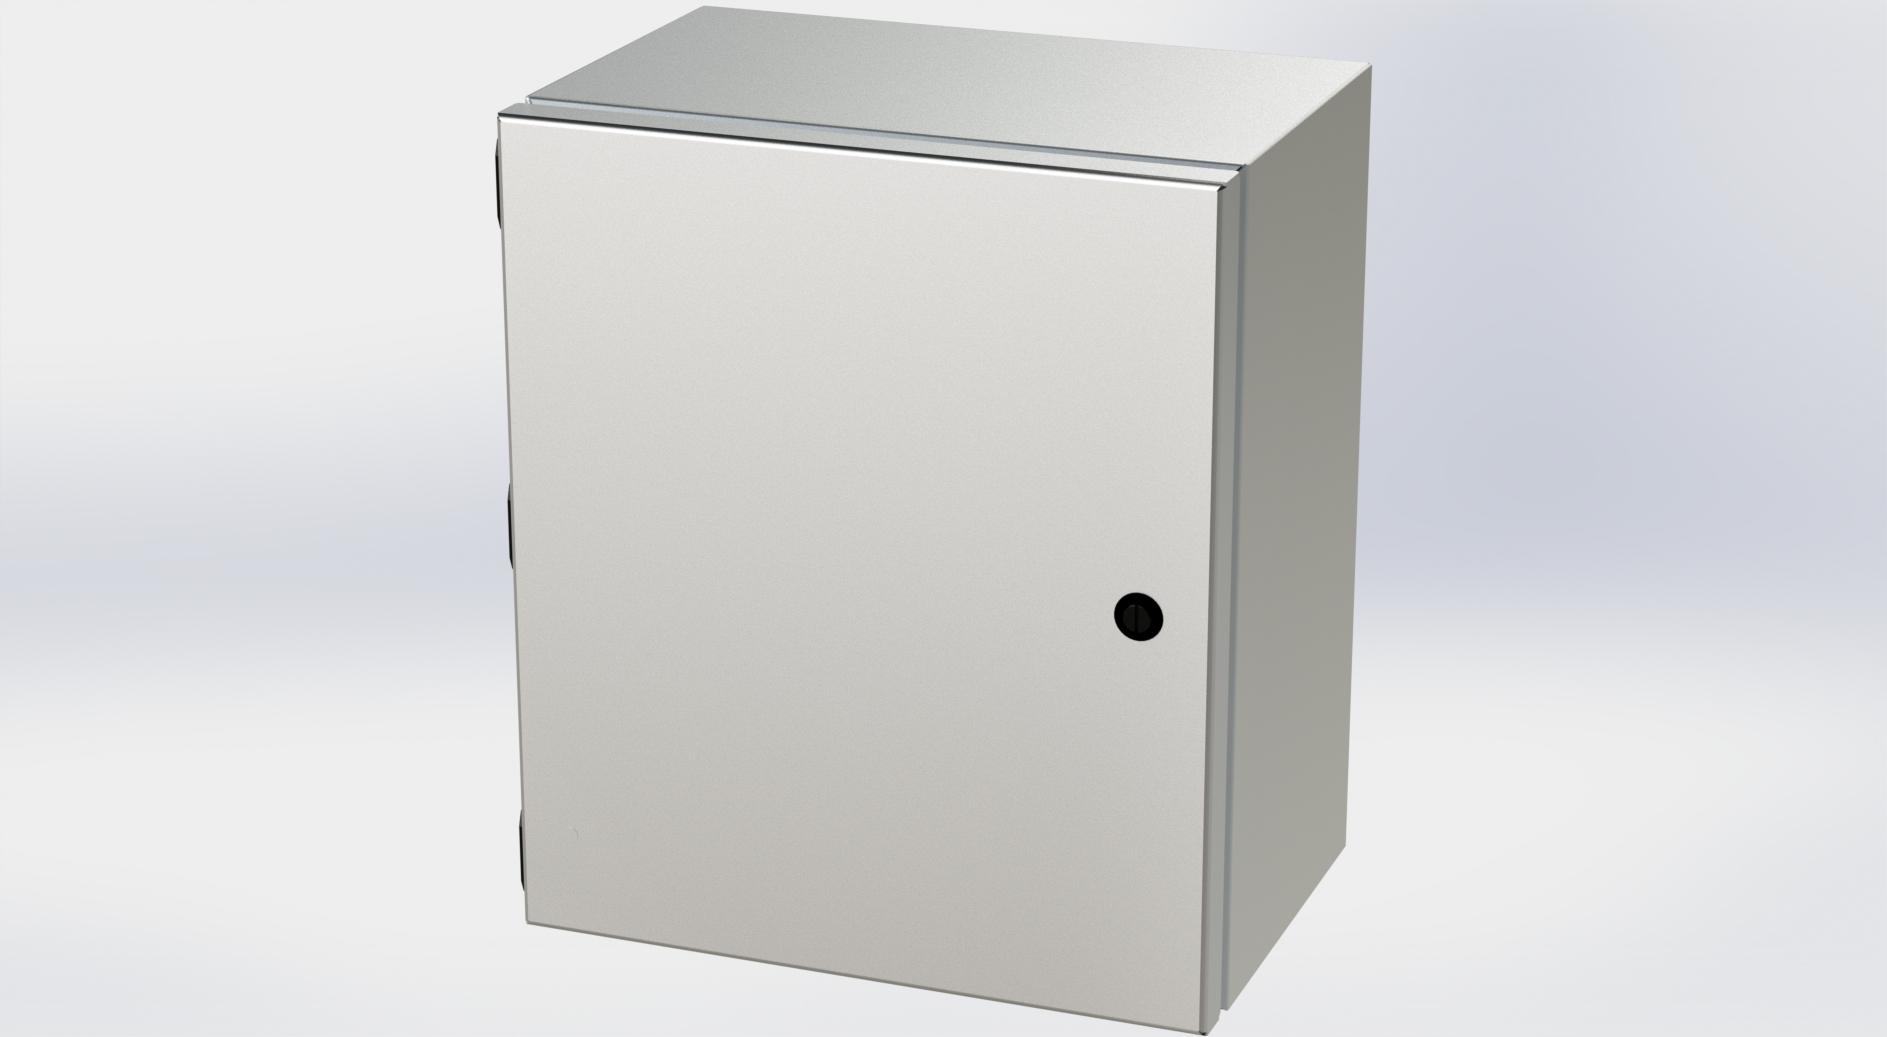 Saginaw Control SCE-14128ELJSS6 S.S. ELJ Enclosure, Height:14.00", Width:12.00", Depth:8.00", #4 brushed finish on all exterior surfaces. Optional sub-panels are powder coated white.